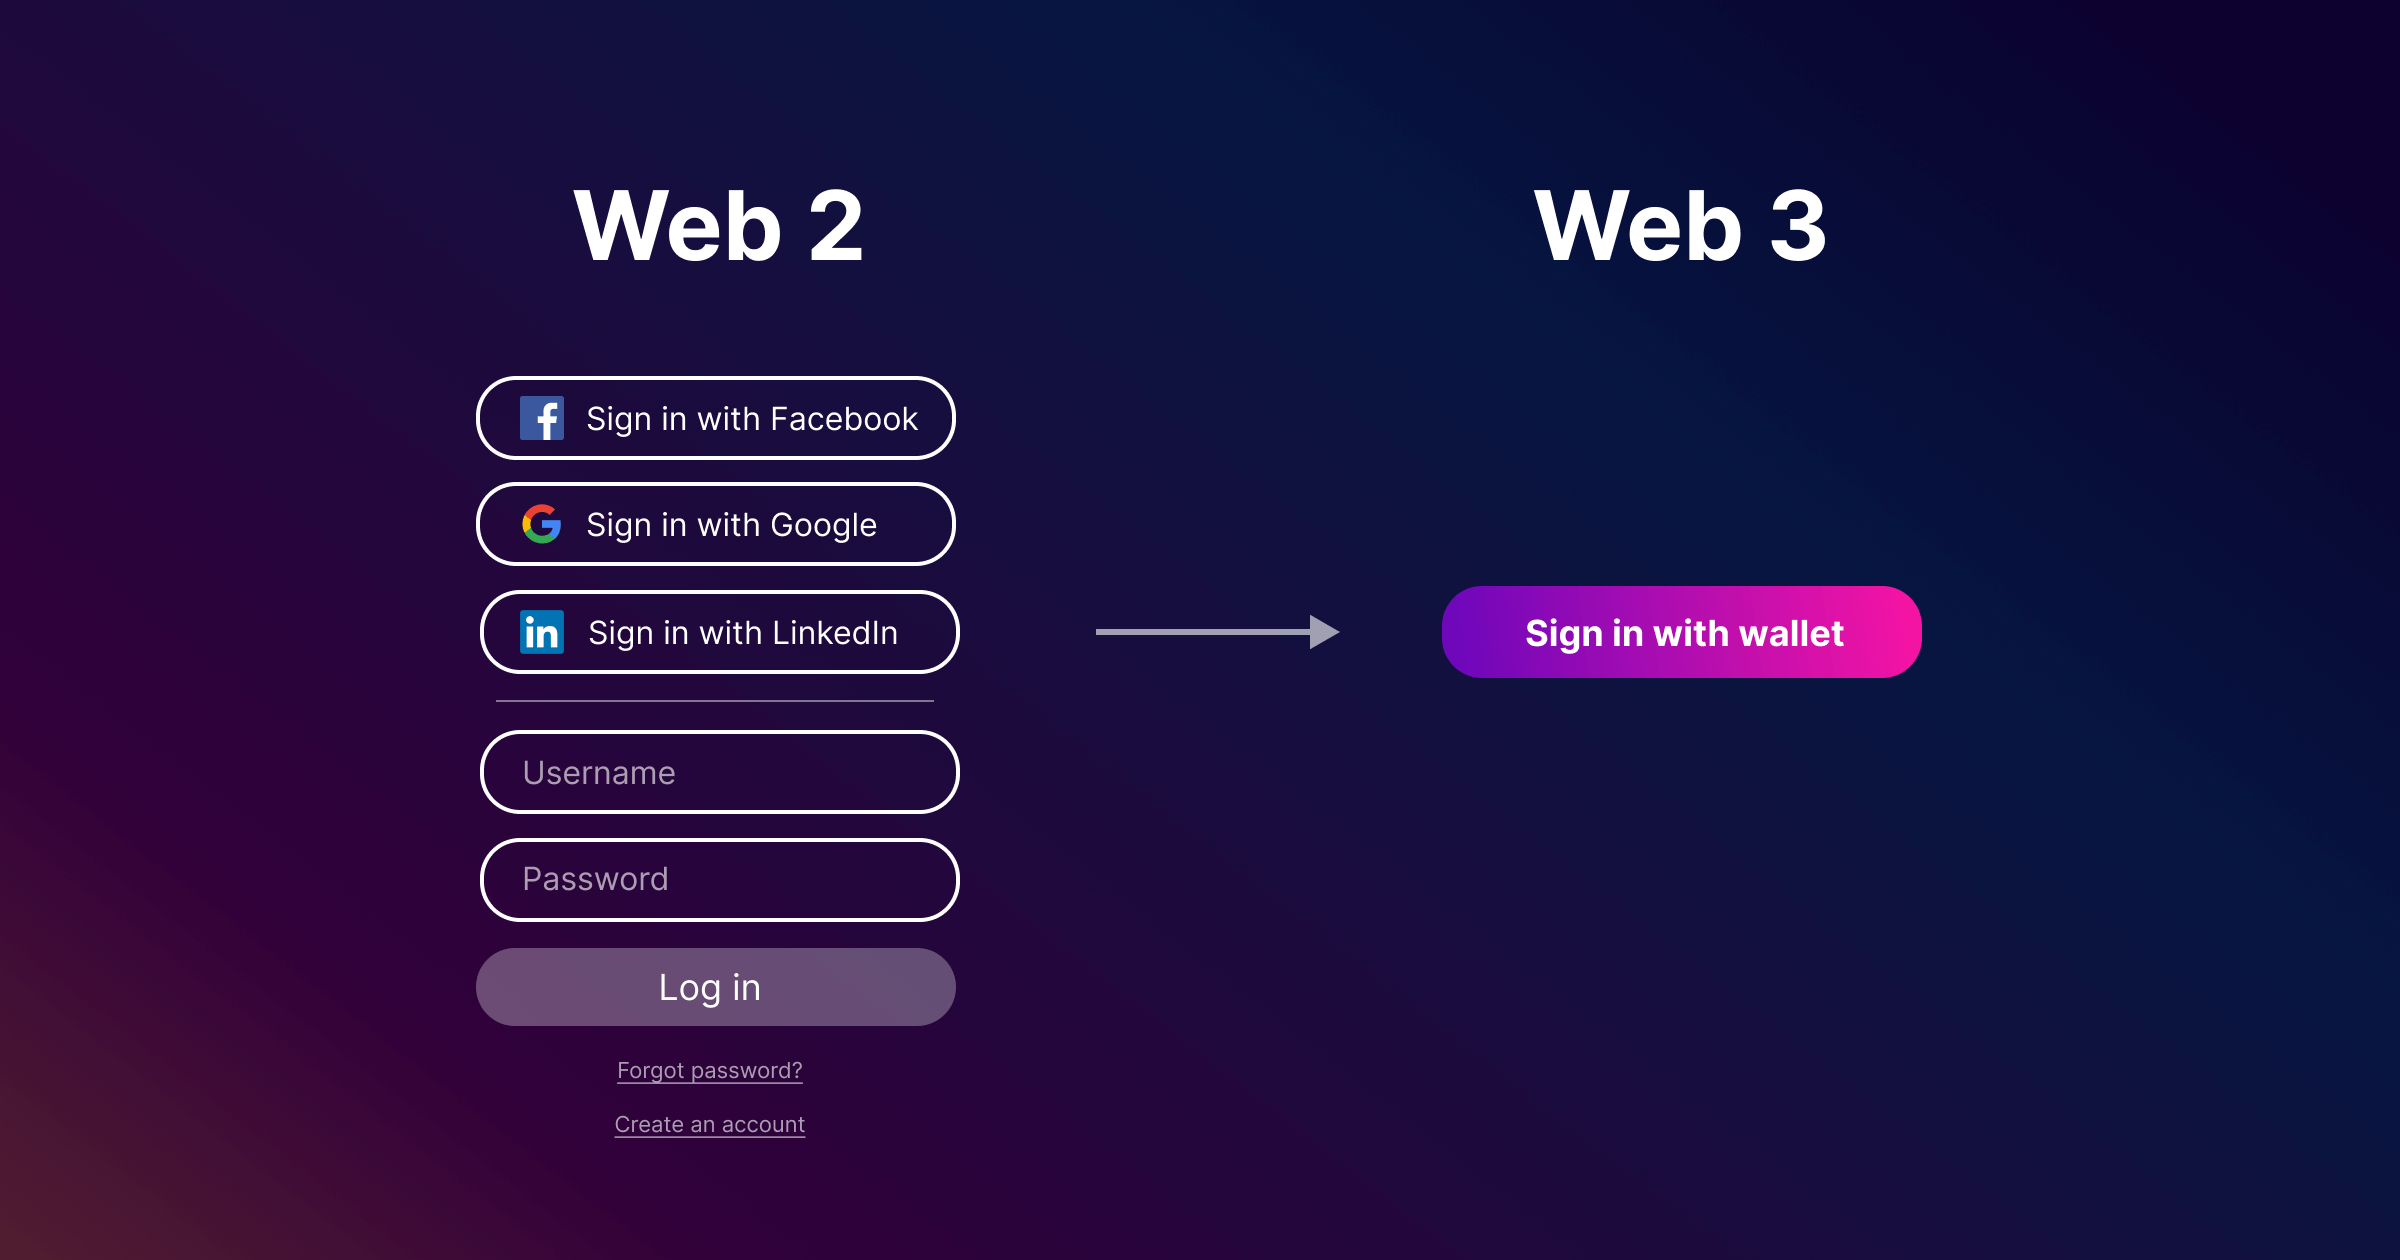 The future of authentication is web3